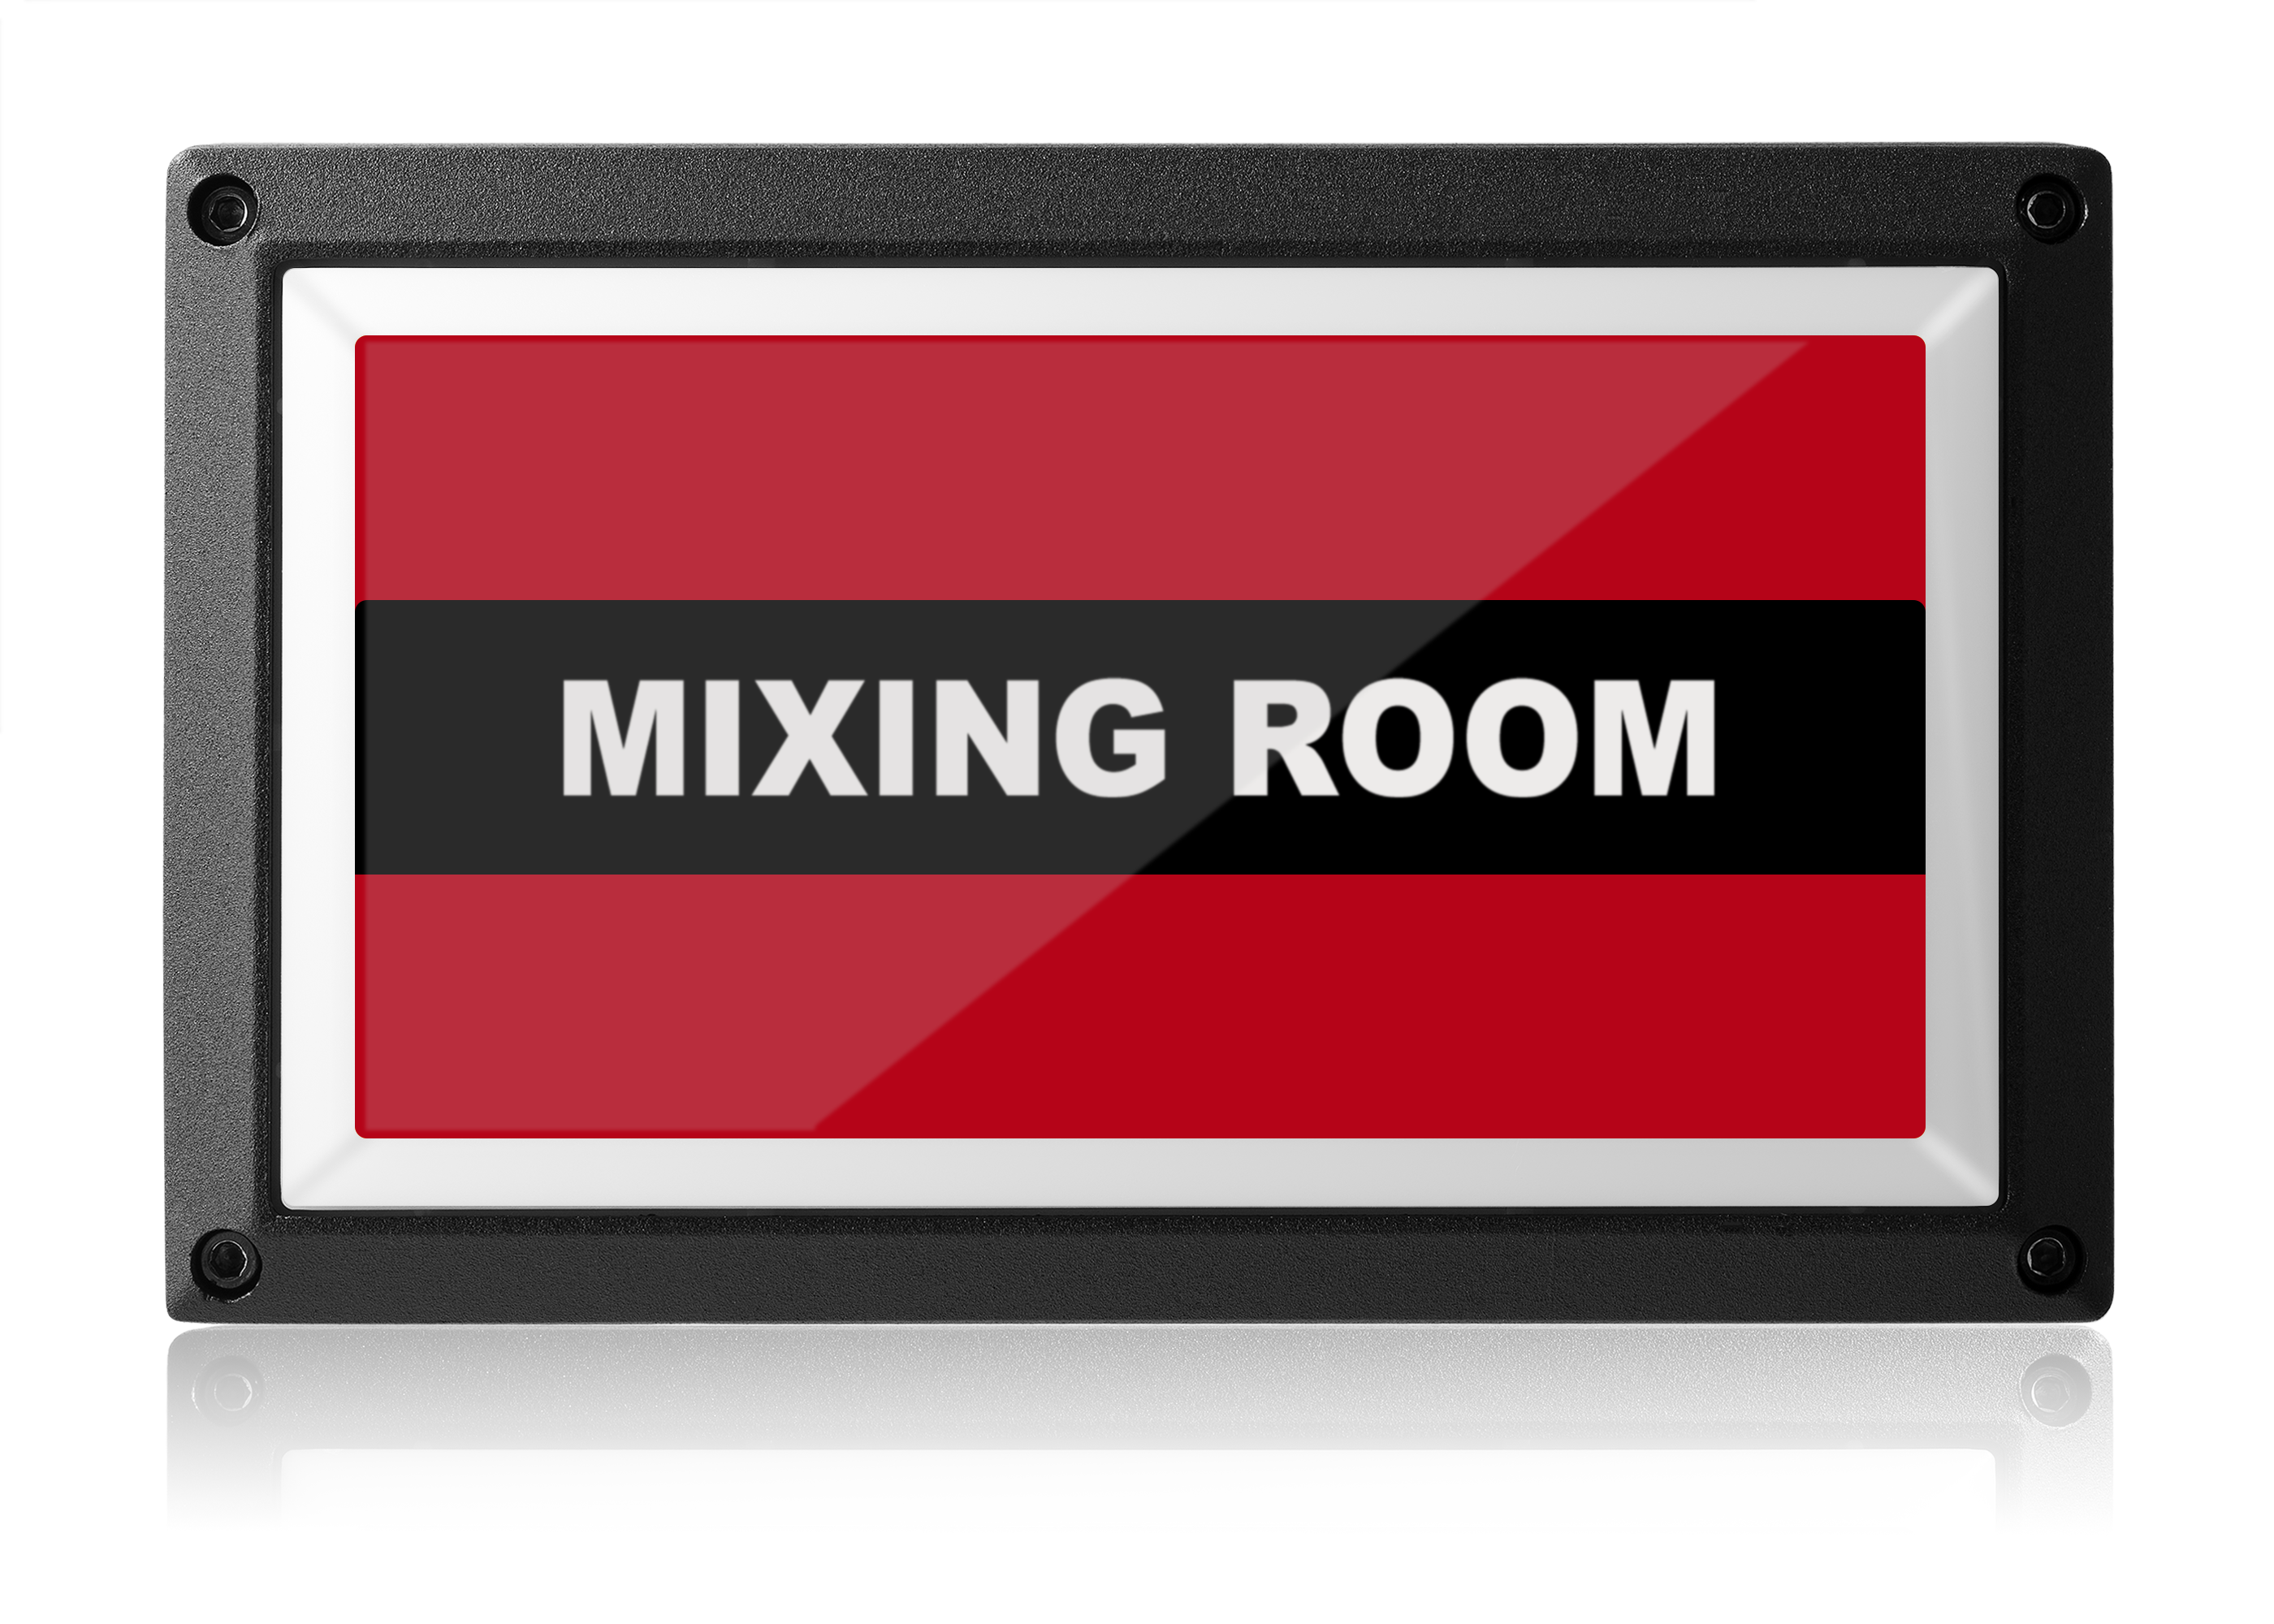 Mixing Room Light - Red ISO - Rekall Dynamics LED Sign-Red-Low Voltage (12-24v DC)-